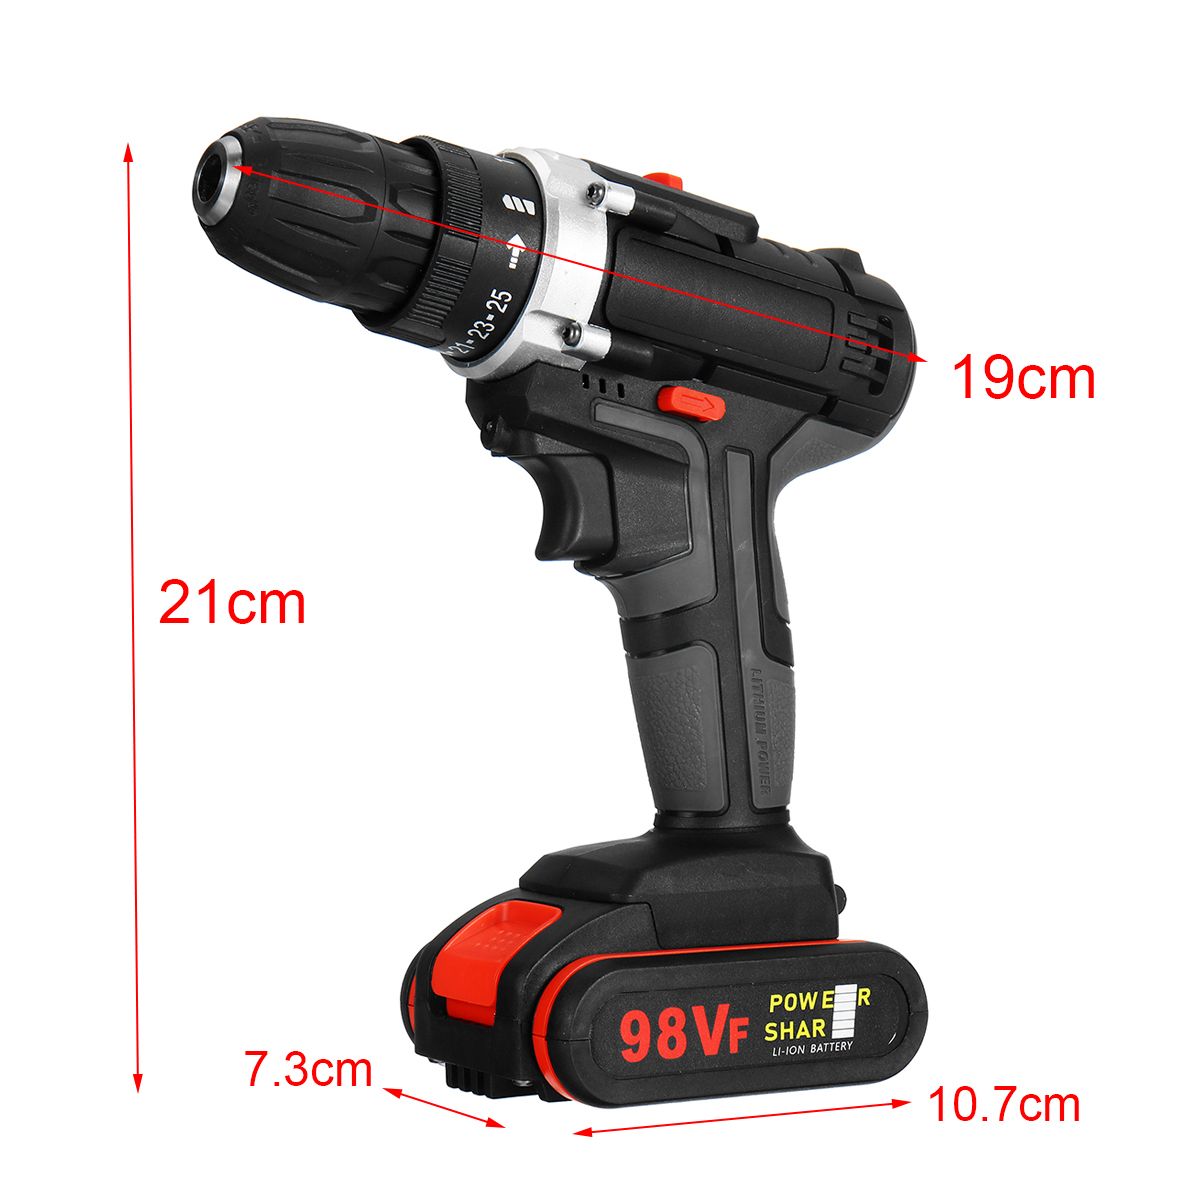 98VF-Cordless-Electric-Impact-Drill-Screwdriver-251-Torque-Rechargeable-Household-Screwdriver-1764622